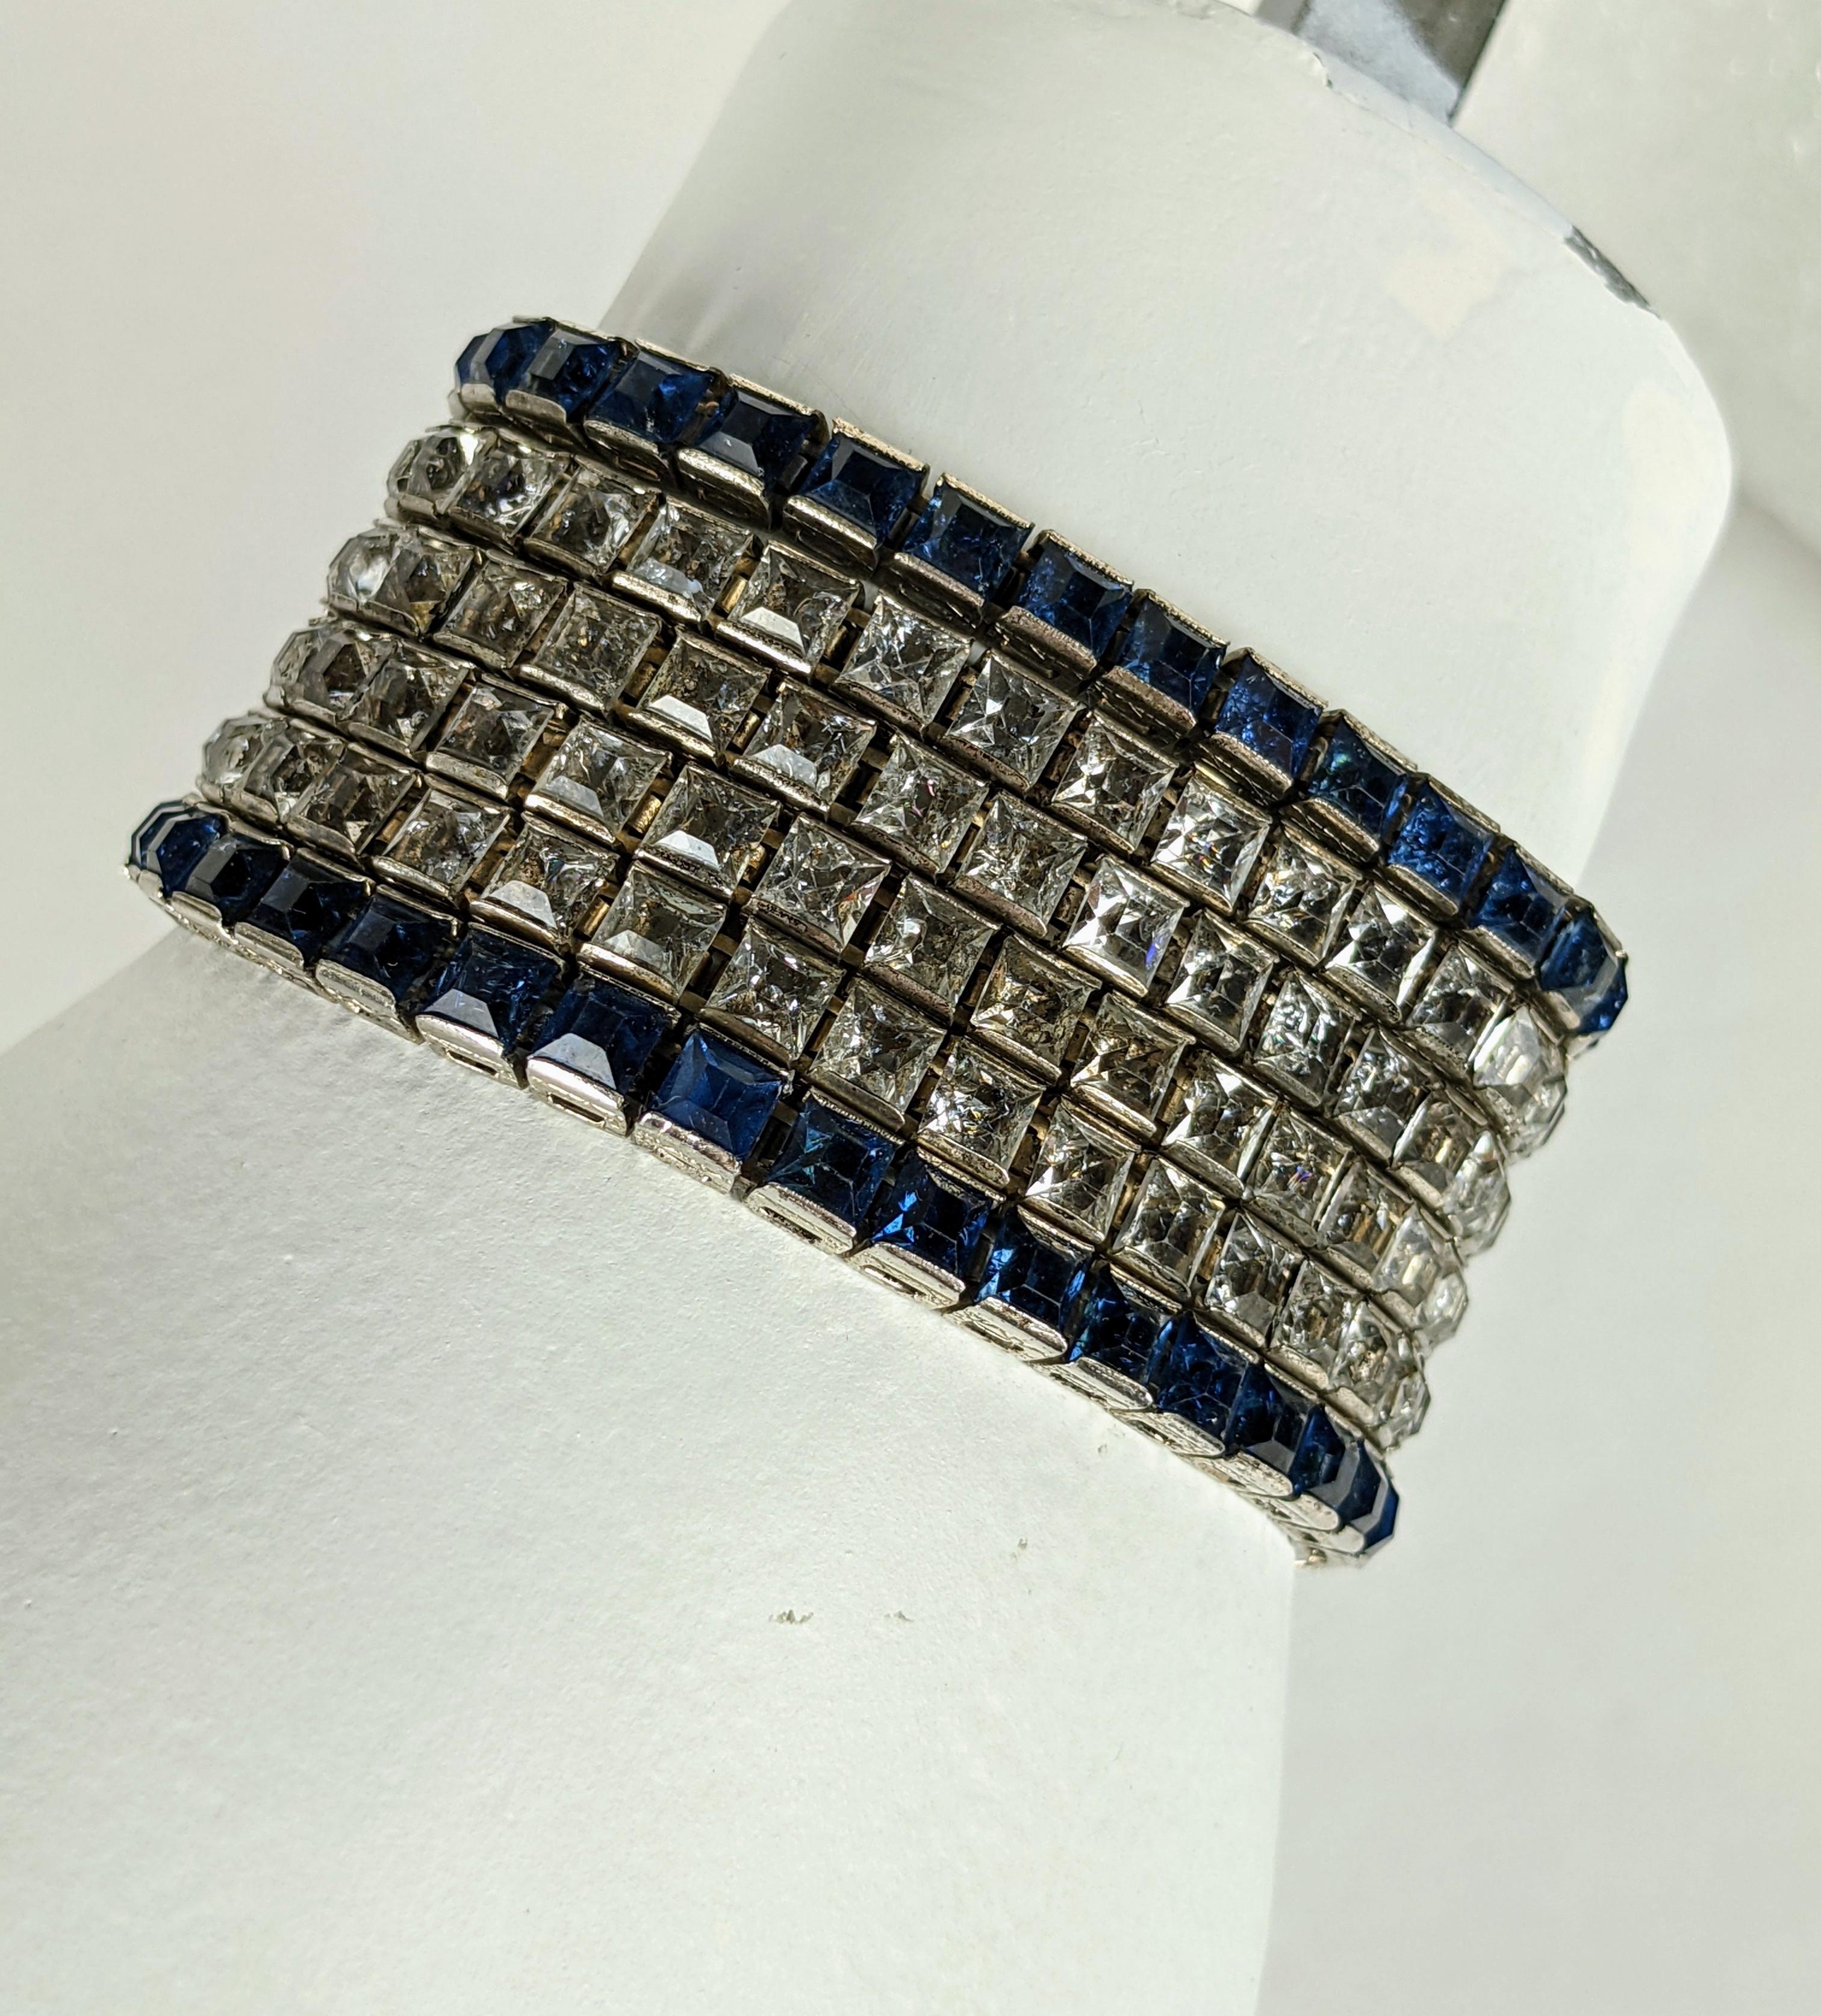 Unusual Art Deco Channel Set Wide Bracelet composed of 6 channel set line bracelets in crystal and dark sapphire crystals joined with an elaborate clasp. Unusual in its width as usually these were worn singly and stacked along wrist. 
Rhodium